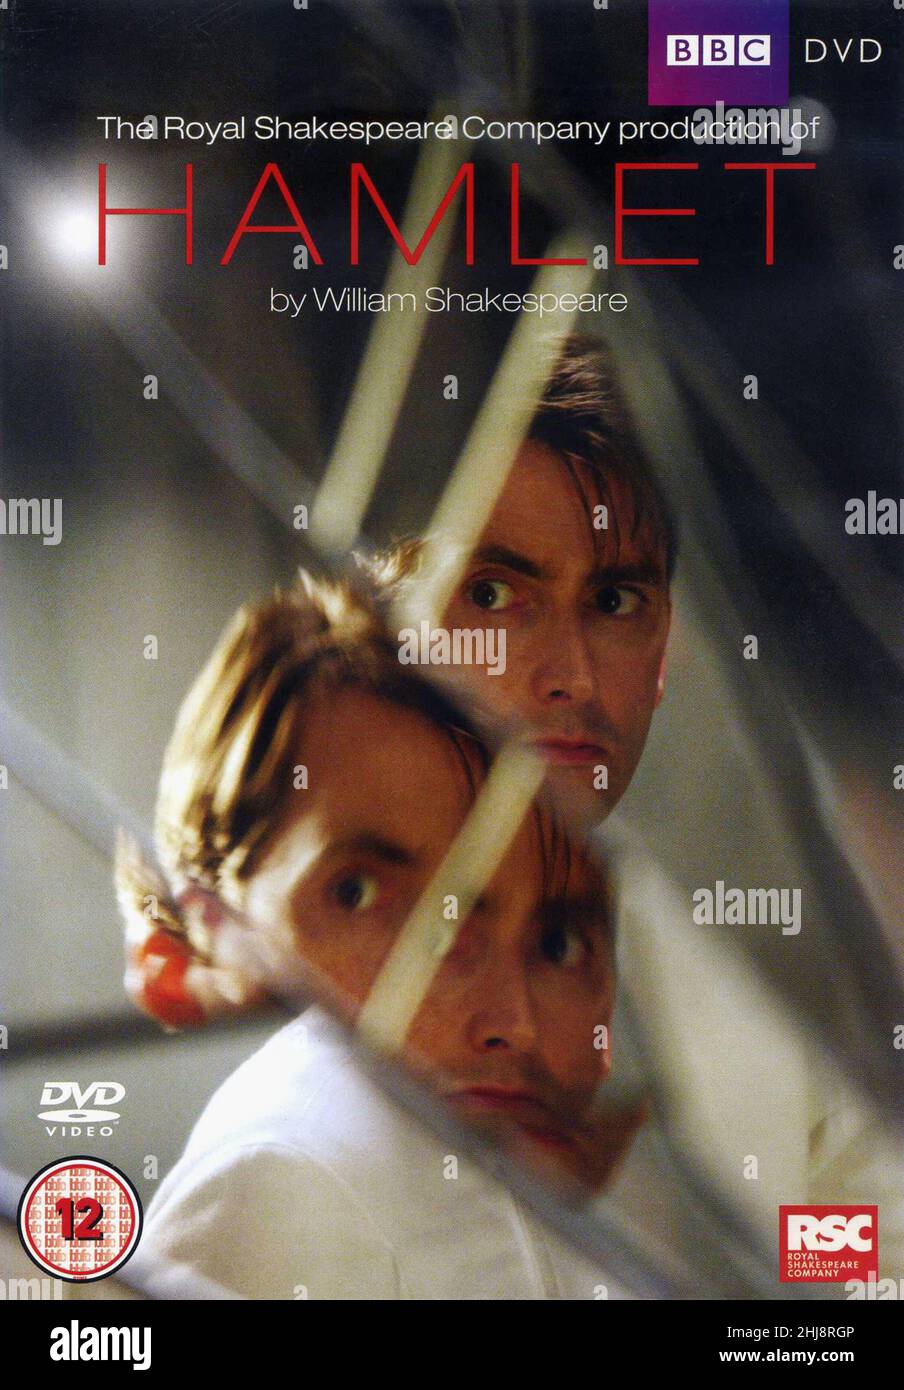 DVD Cover. 'Hamlet' by William Shakespeare. Royal Shakespeare Company. Stock Photo